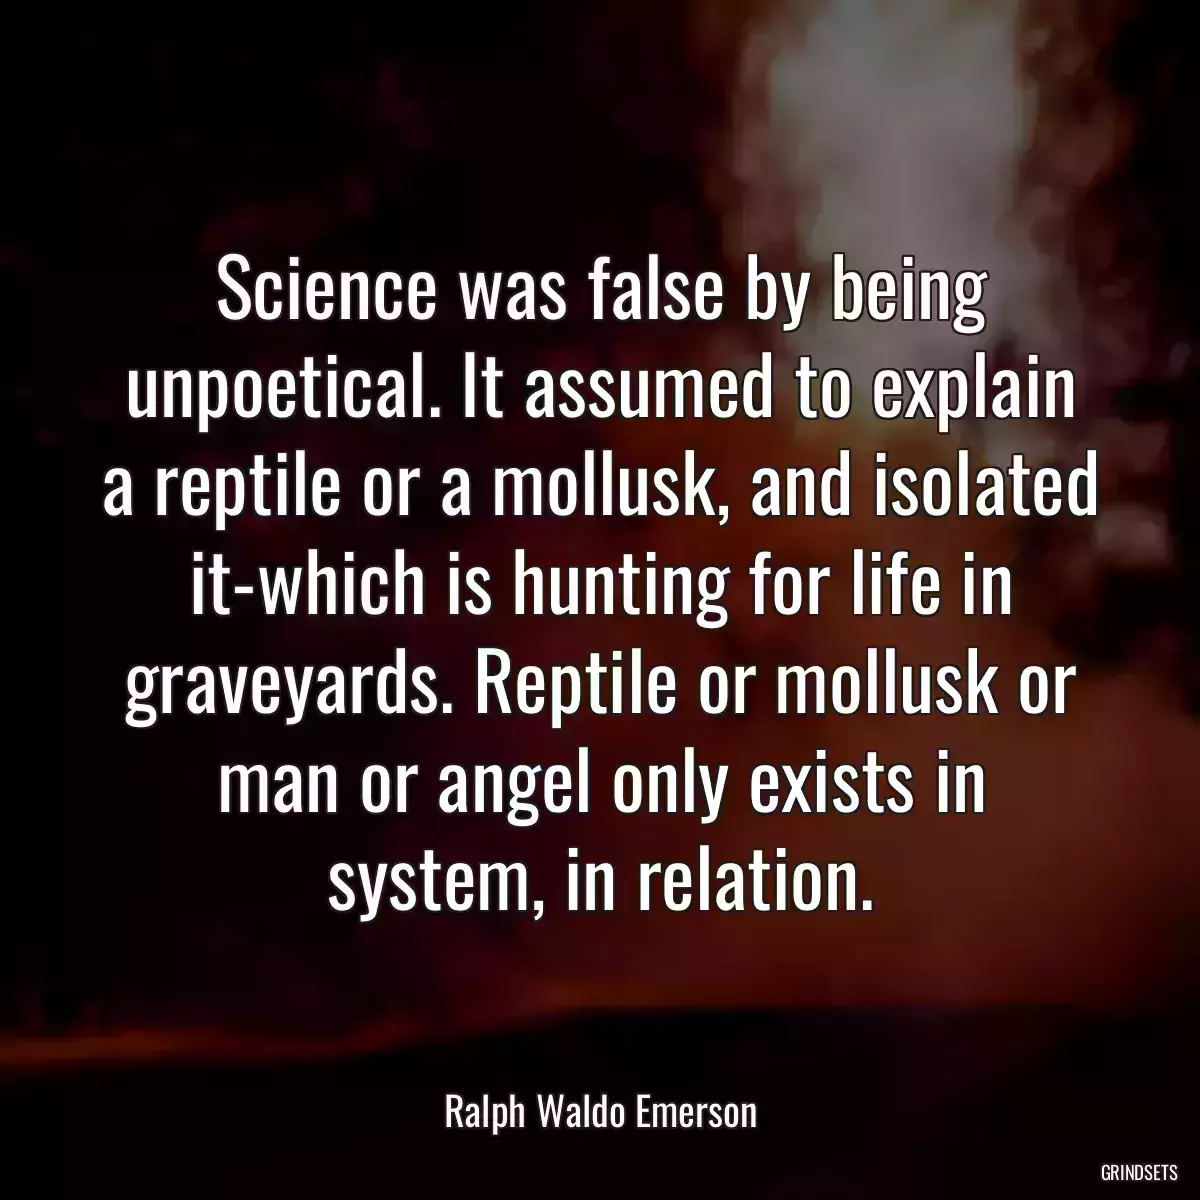 Science was false by being unpoetical. It assumed to explain a reptile or a mollusk, and isolated it-which is hunting for life in graveyards. Reptile or mollusk or man or angel only exists in system, in relation.